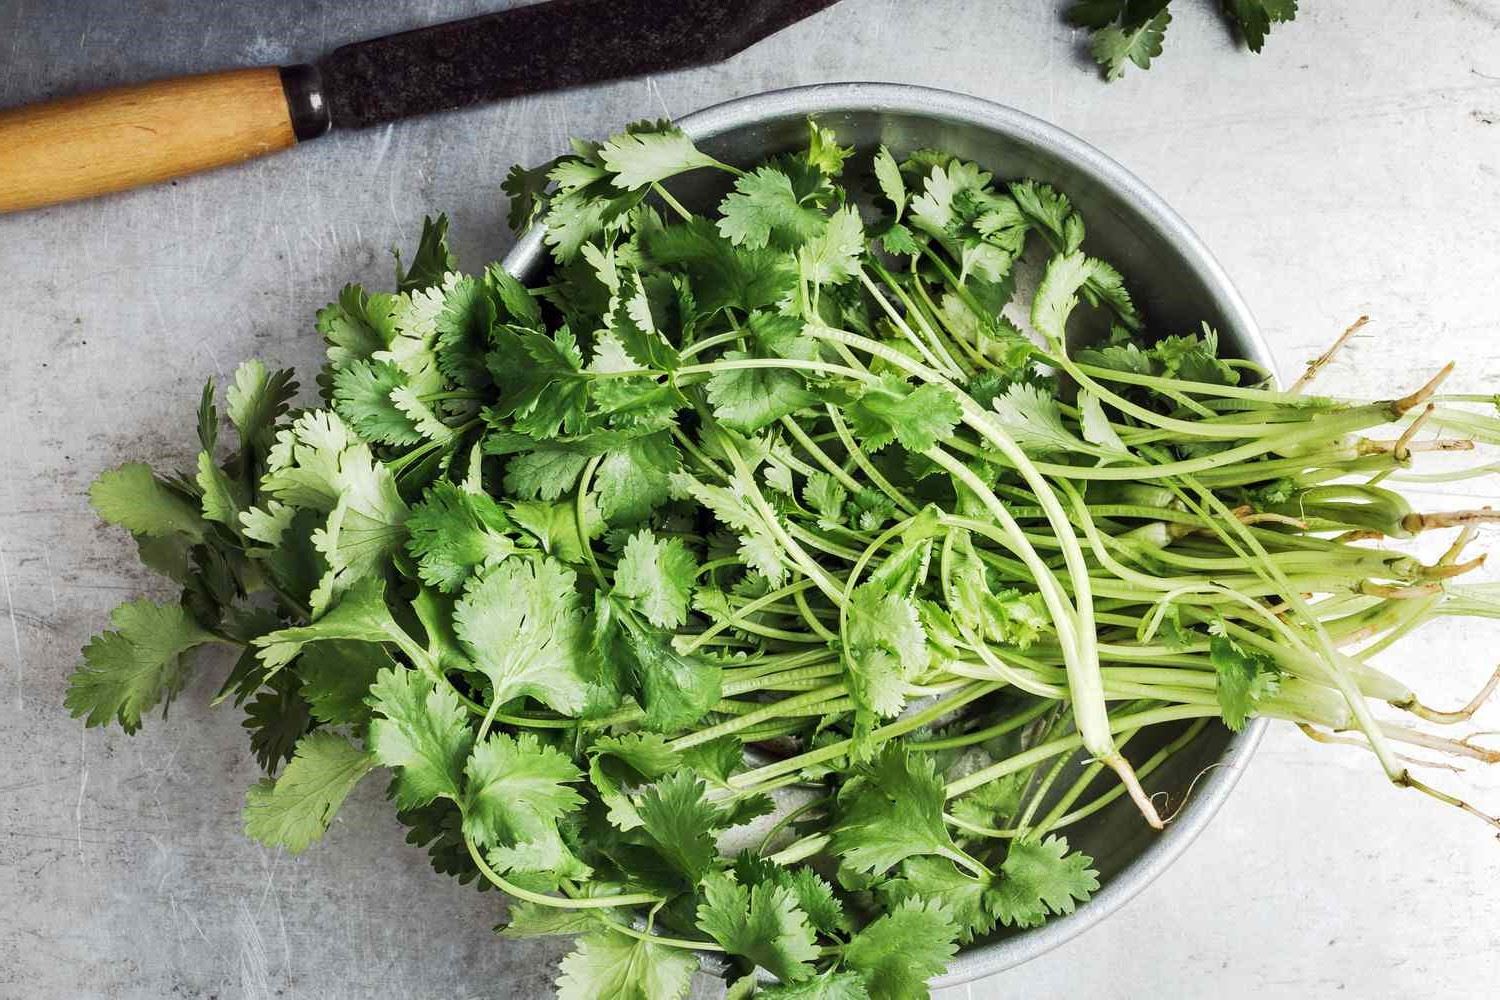 How To Keep Cilantro Fresh: A Guide To Preserving The Flavor And Texture